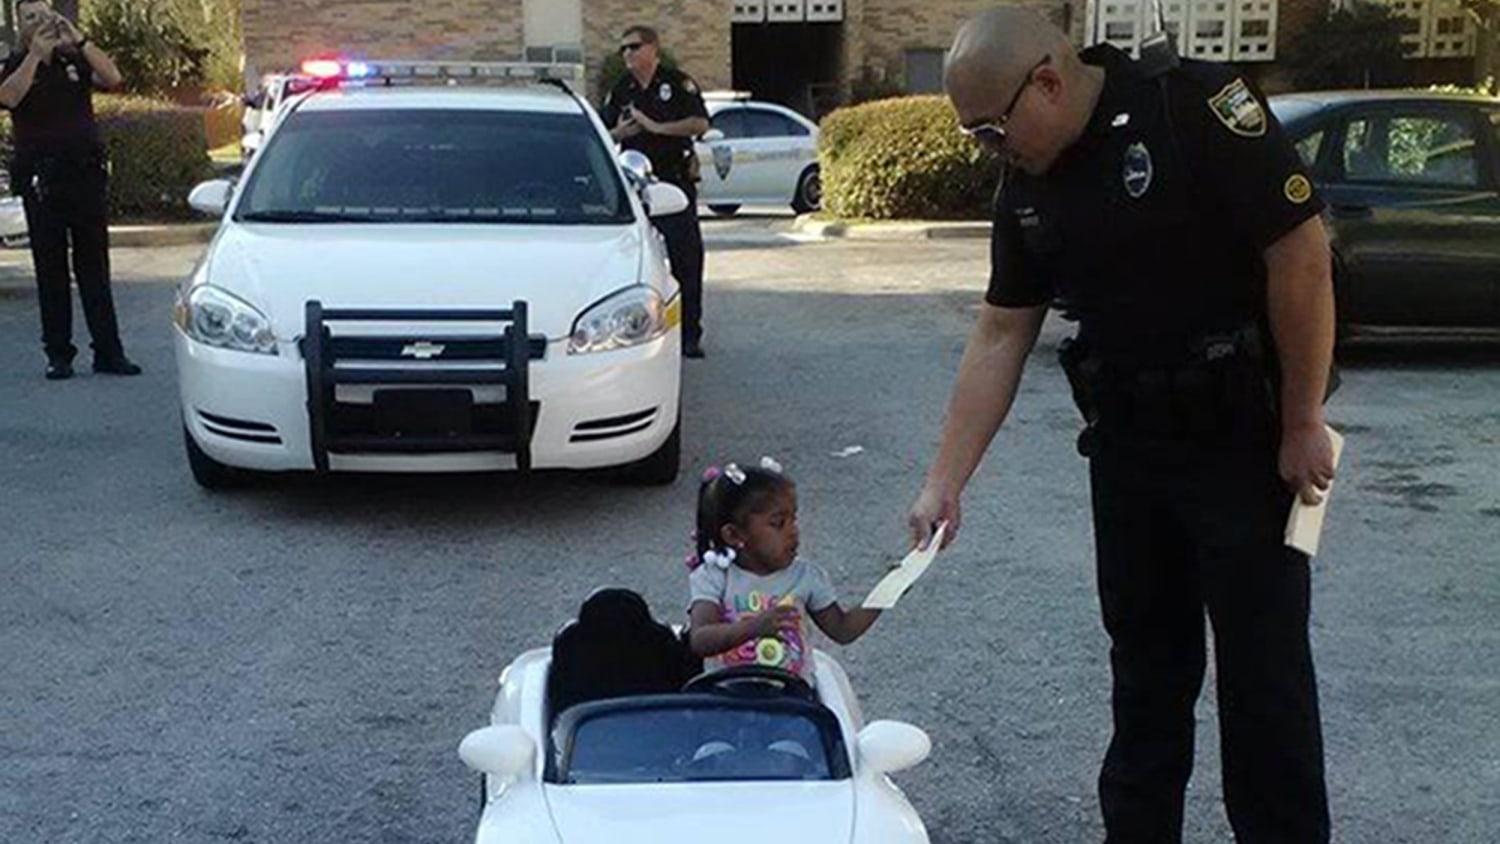 Photo of toddler in toy convertible getting ticket from cops goes viral